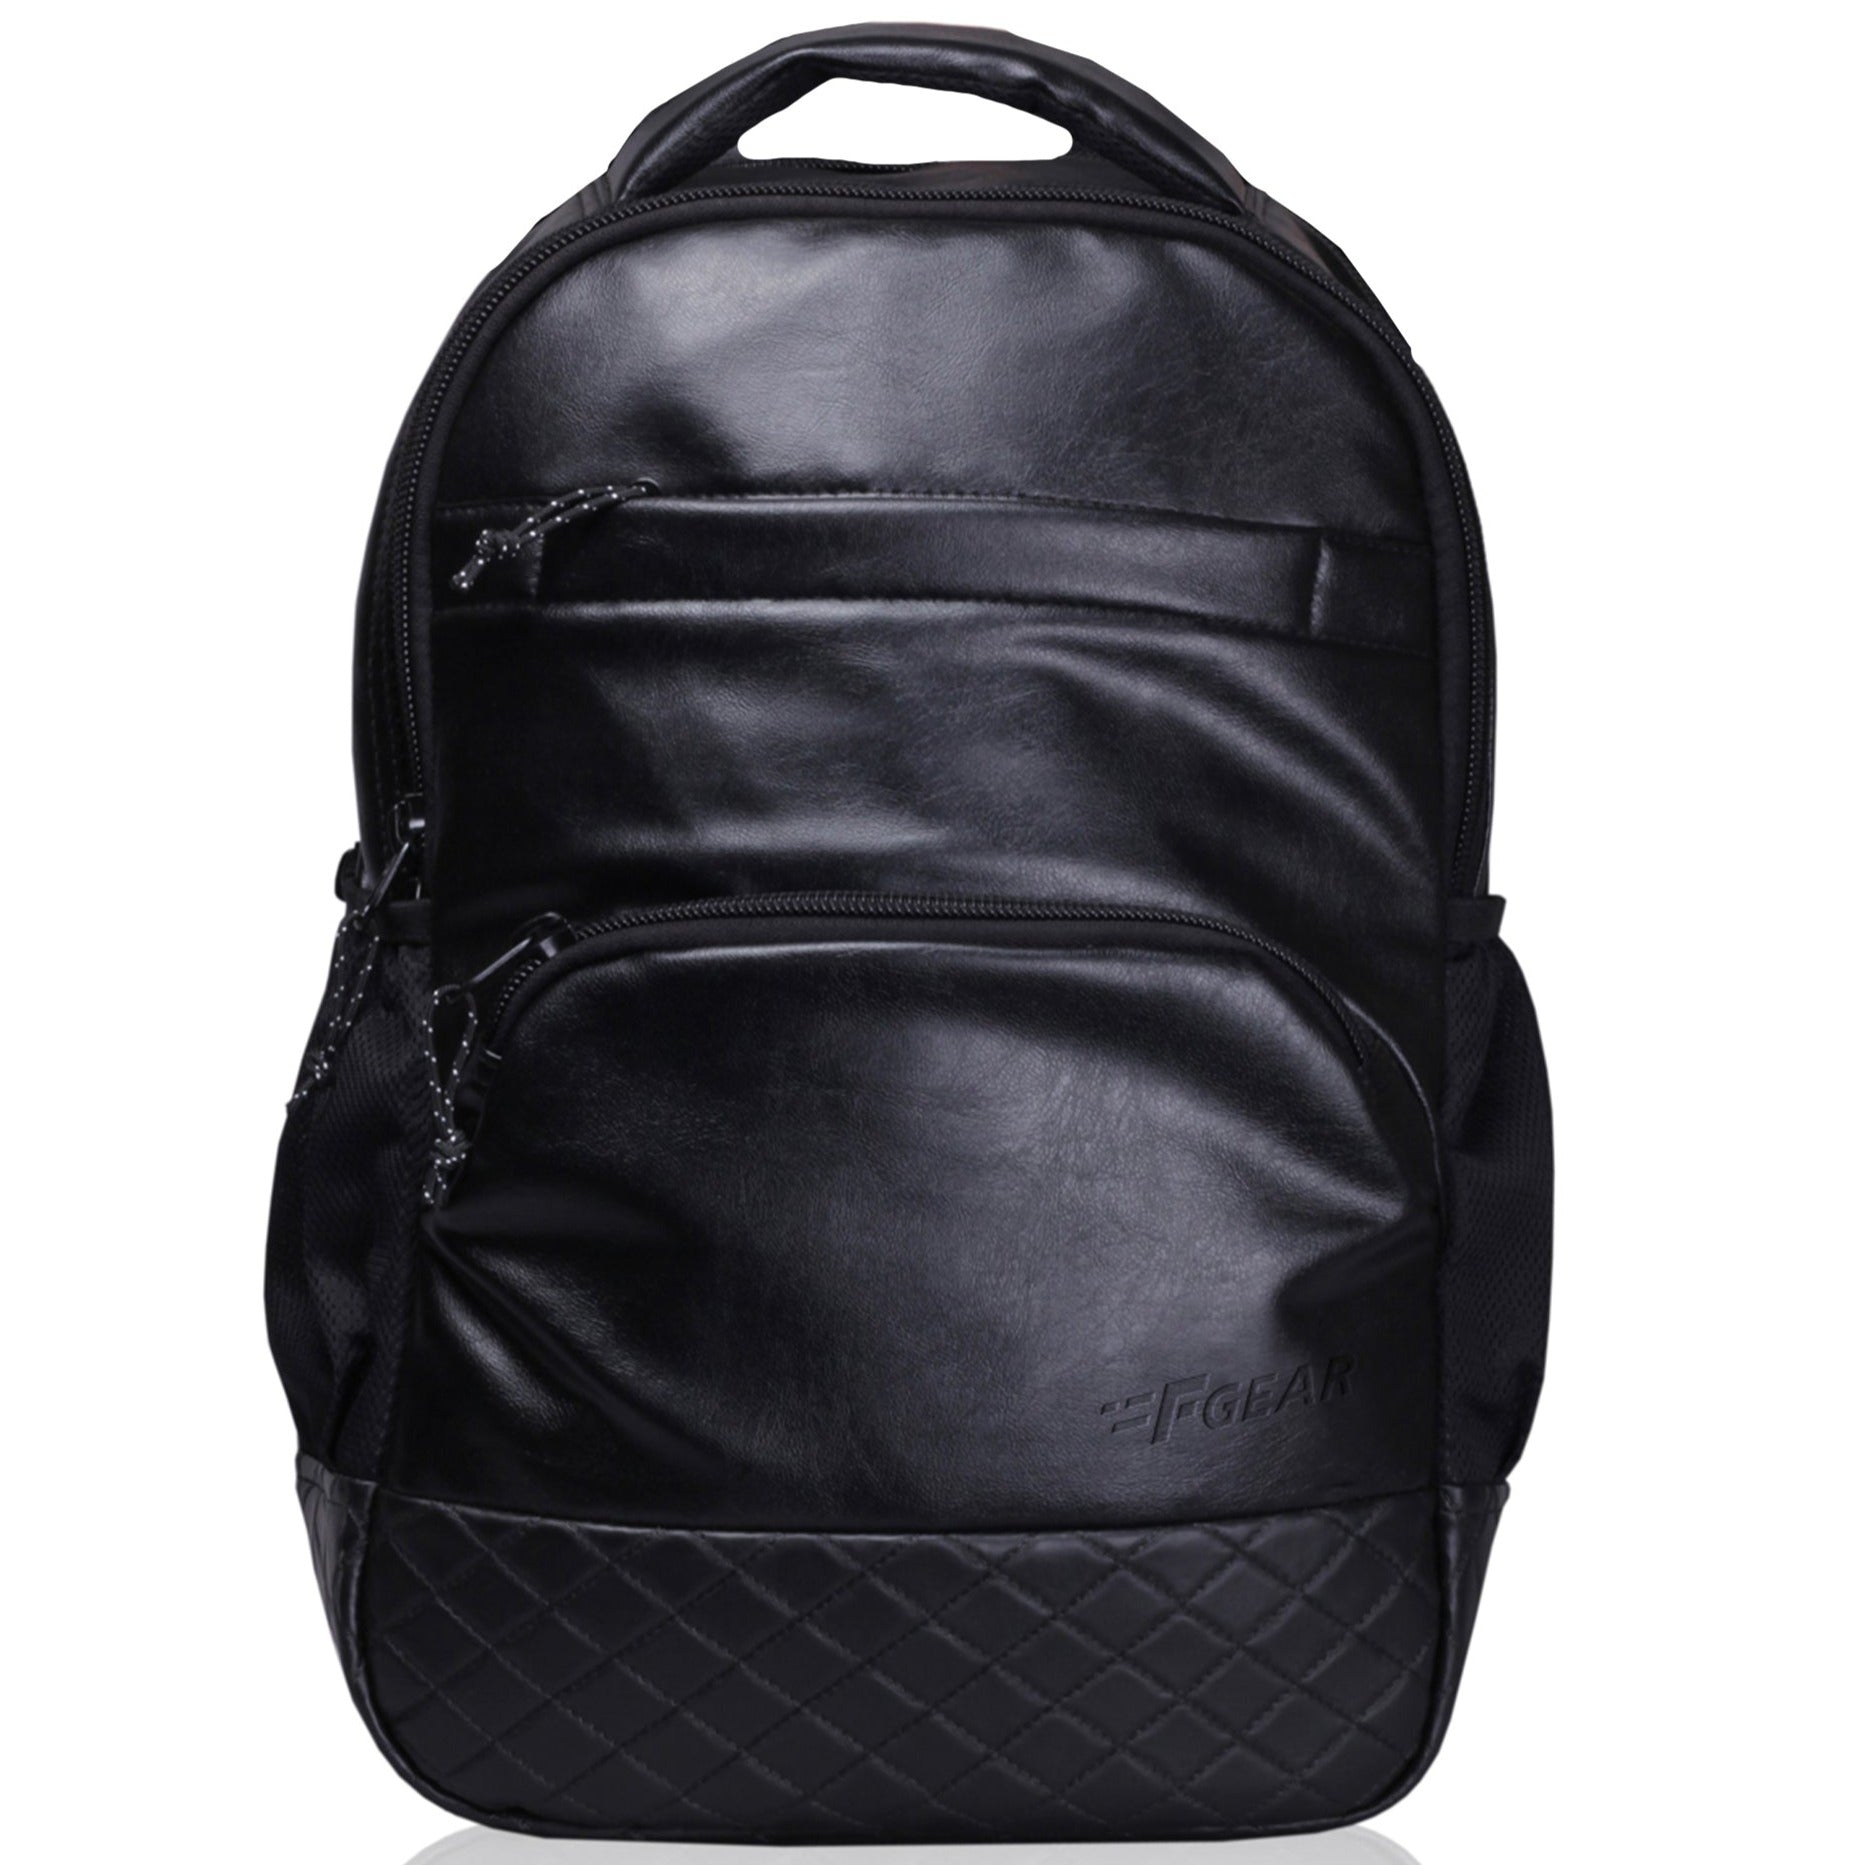 Classic Leather Bag - Laptop And Office Bag - Black